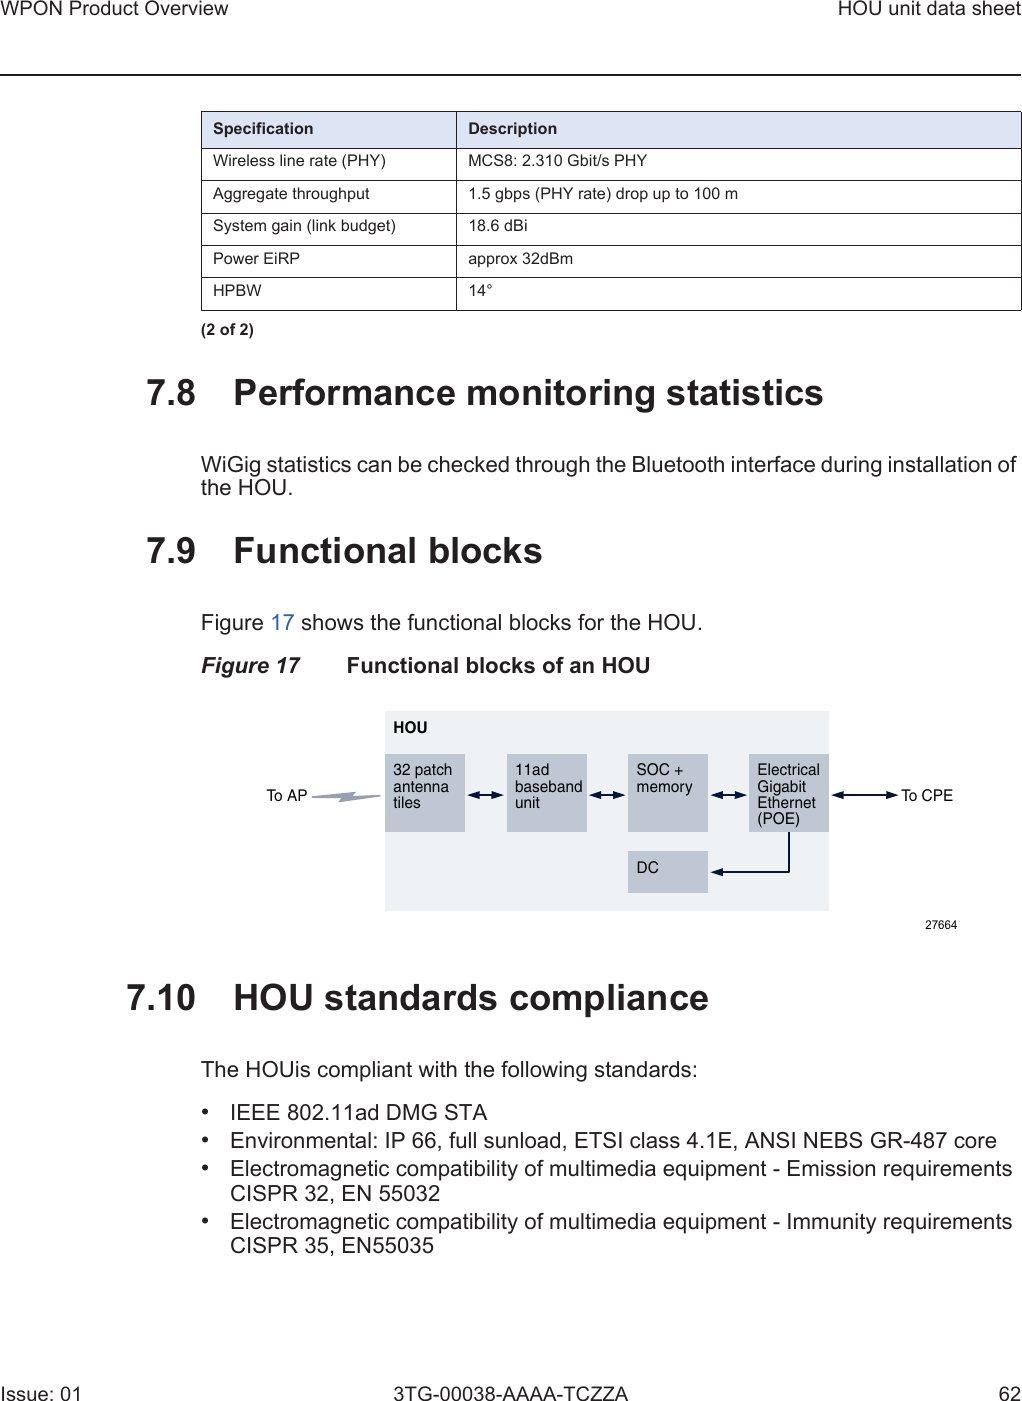 WPON Product Overview HOU unit data sheetIssue: 01 3TG-00038-AAAA-TCZZA 627.8 Performance monitoring statisticsWiGig statistics can be checked through the Bluetooth interface during installation of the HOU.7.9 Functional blocksFigure 17 shows the functional blocks for the HOU. Figure 17 Functional blocks of an HOU7.10 HOU standards complianceThe HOUis compliant with the following standards: •IEEE 802.11ad DMG STA•Environmental: IP 66, full sunload, ETSI class 4.1E, ANSI NEBS GR-487 core•Electromagnetic compatibility of multimedia equipment - Emission requirementsCISPR 32, EN 55032•Electromagnetic compatibility of multimedia equipment - Immunity requirementsCISPR 35, EN55035Wireless line rate (PHY) MCS8: 2.310 Gbit/s PHYAggregate throughput 1.5 gbps (PHY rate) drop up to 100 mSystem gain (link budget) 18.6 dBi Power EiRP approx 32dBm HPBW 14°Specification Description(2 of 2)ElectricalGigabitEthernet(POE)To CPETo APSOC +memoryDC11adbasebandunit32 patchantennatilesHOU27664